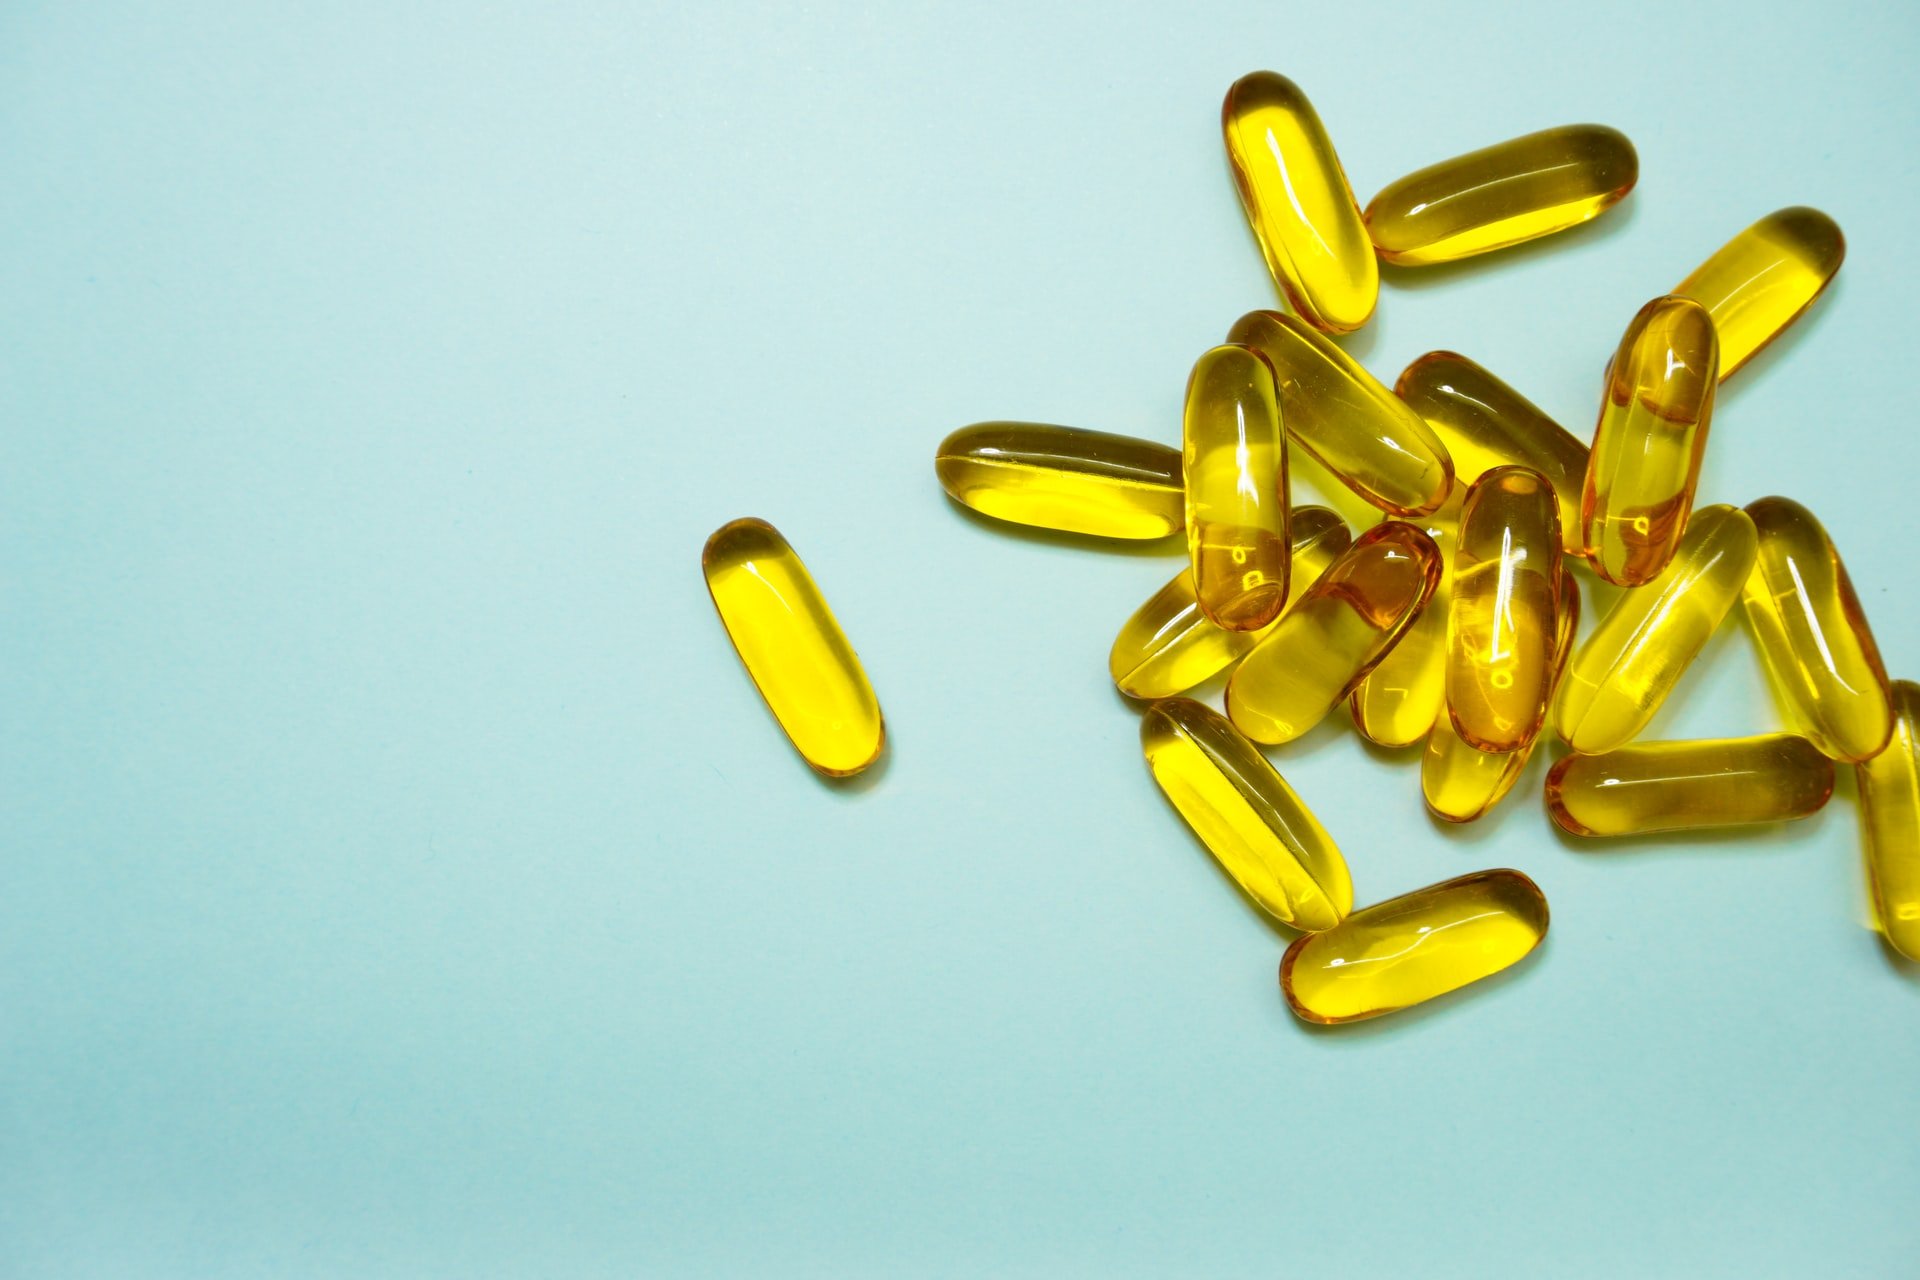 Omega-3 Deficiency Symptoms and How to Make Sure You're Getting Enough